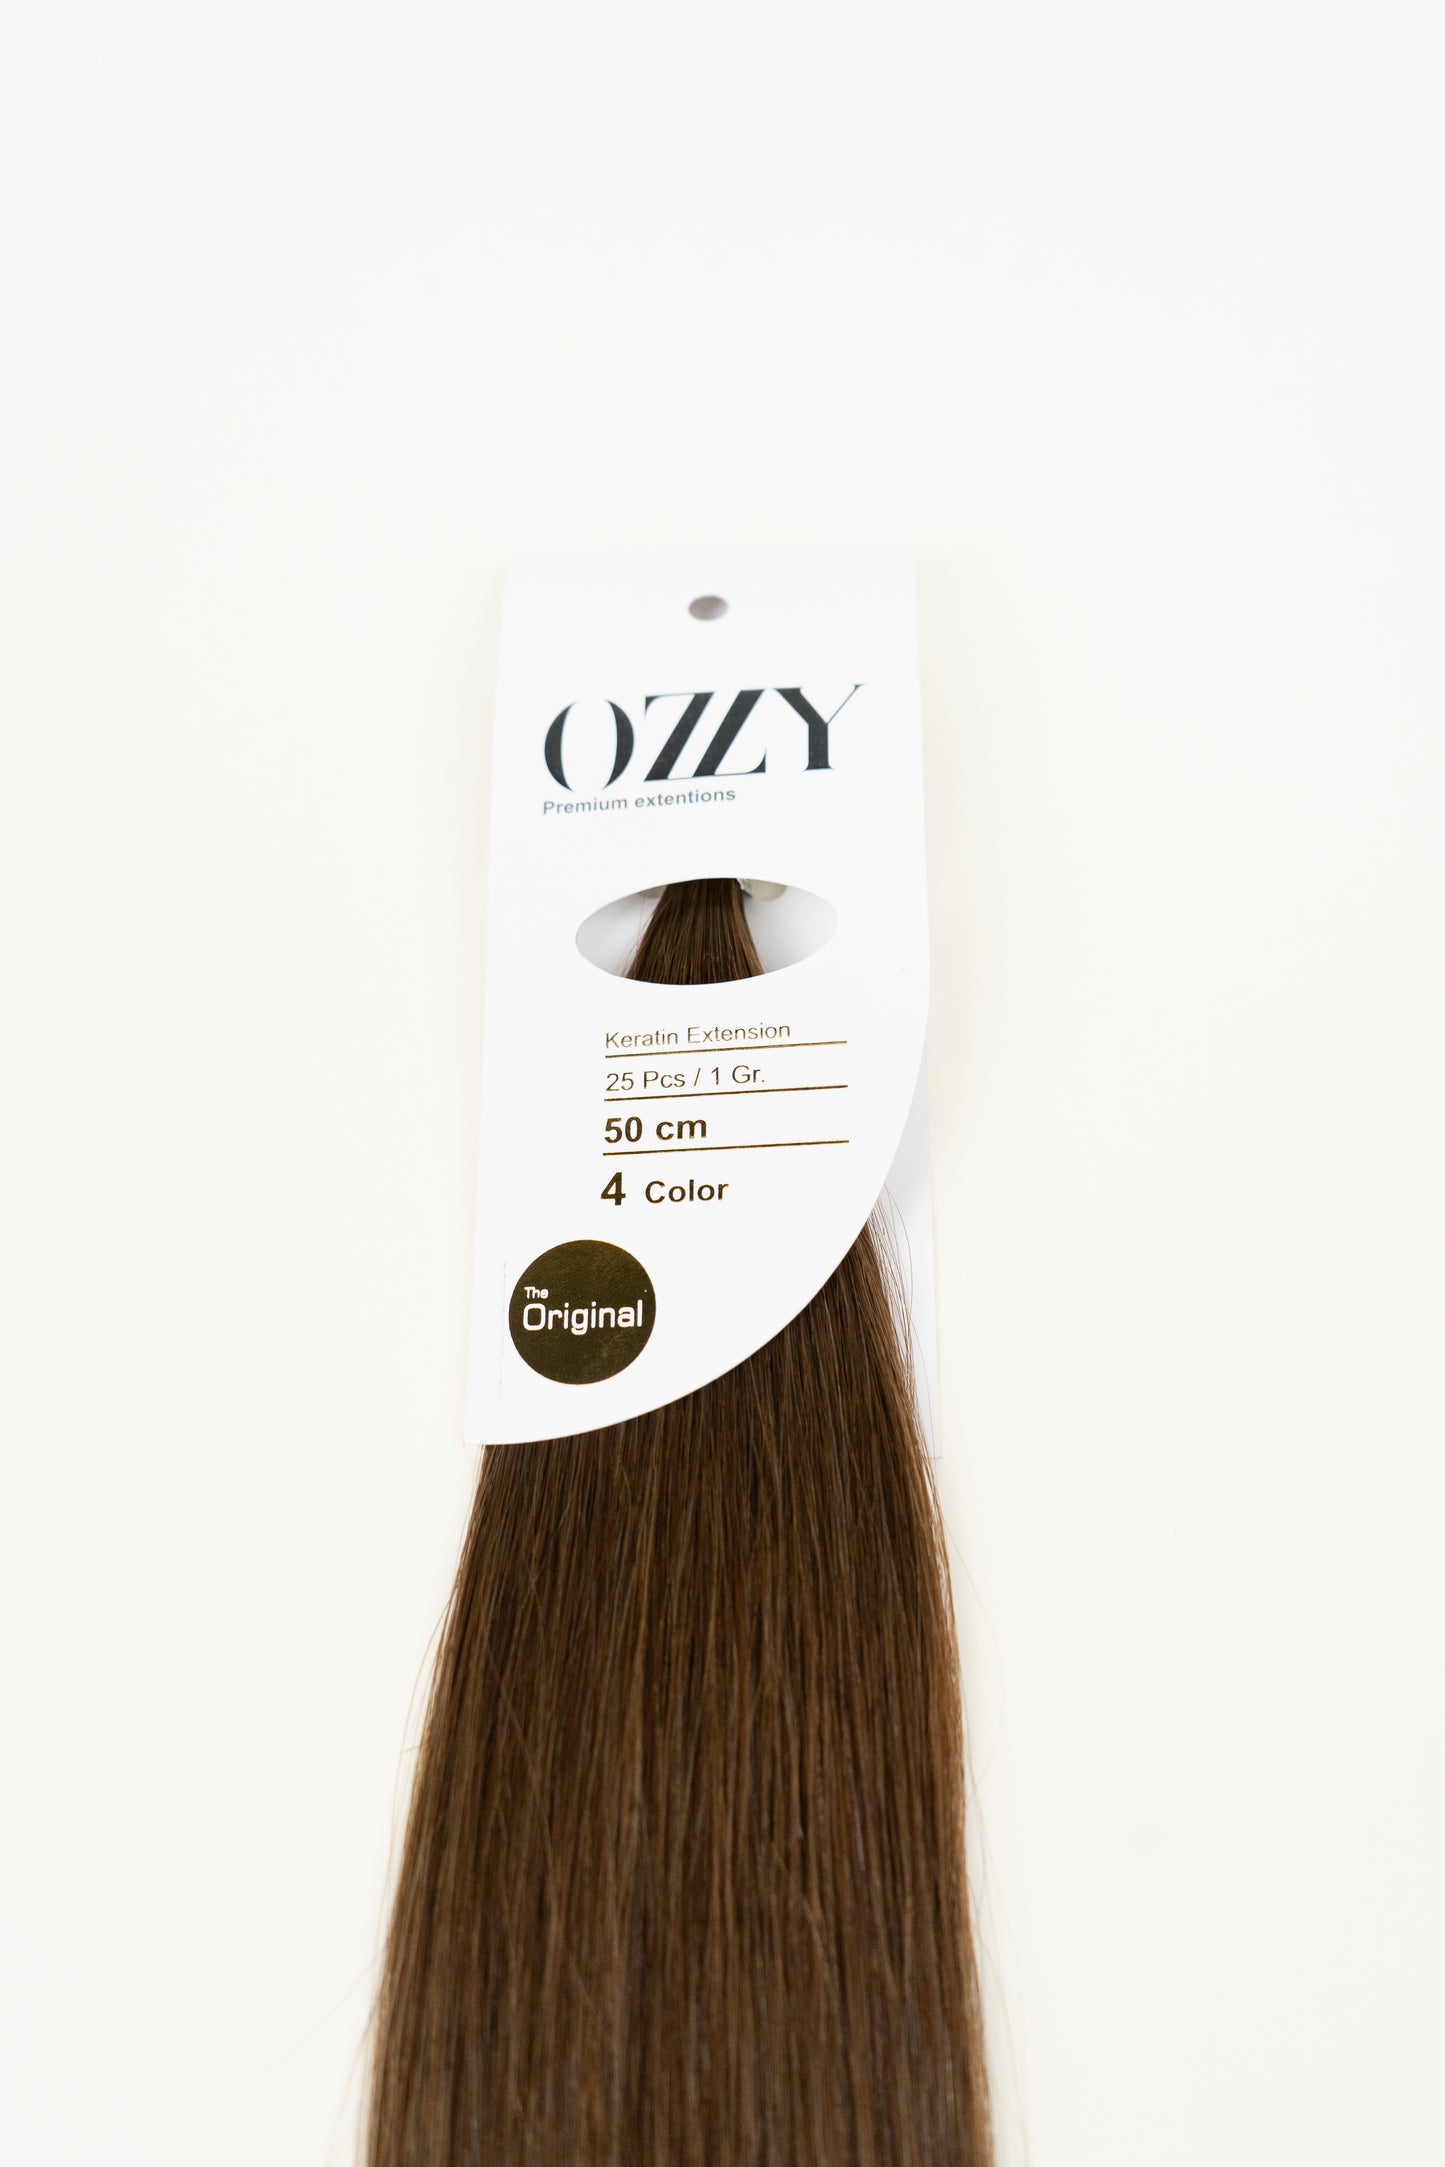 Keratin Extension #4 by Ozzy